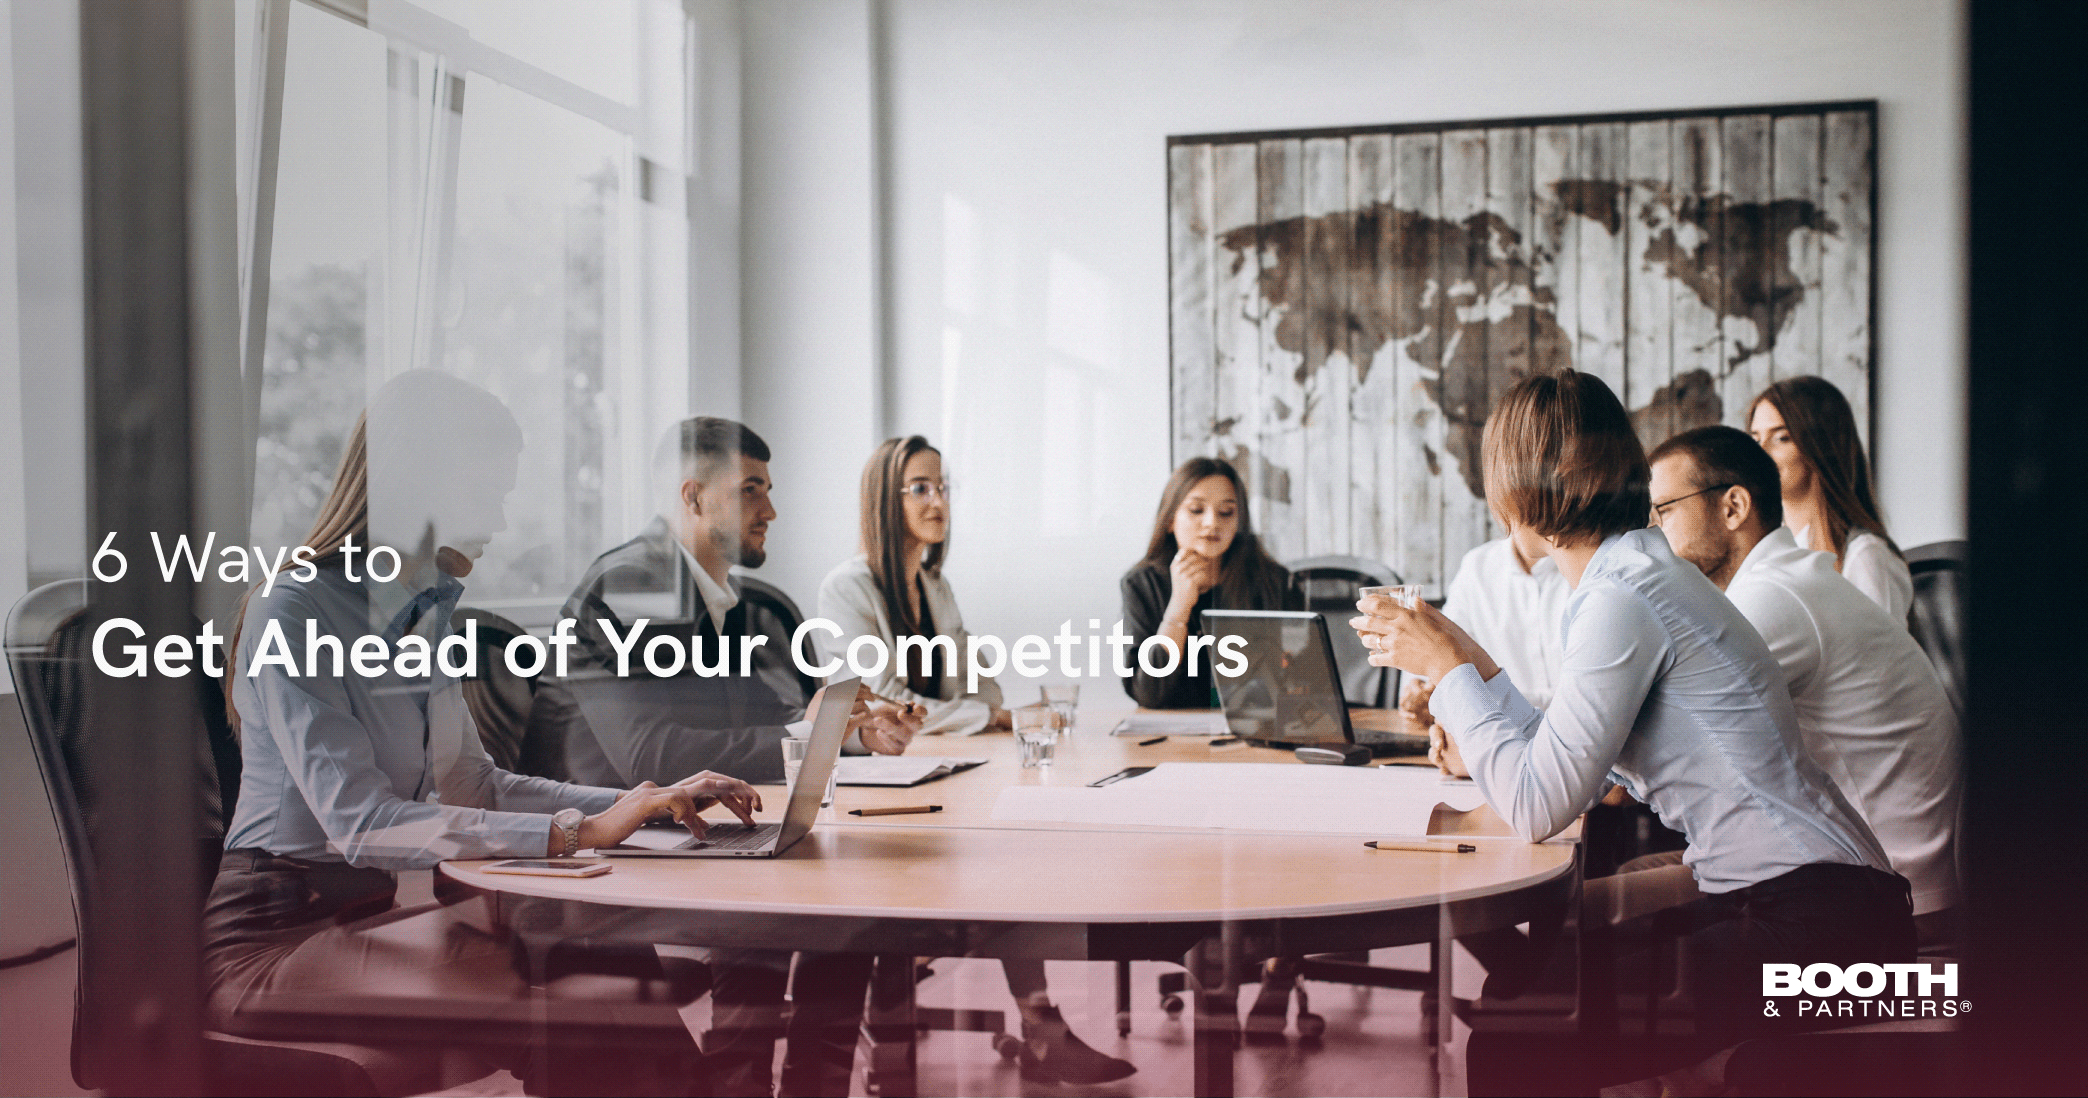 6 Ways to Get Ahead of Your Competitors